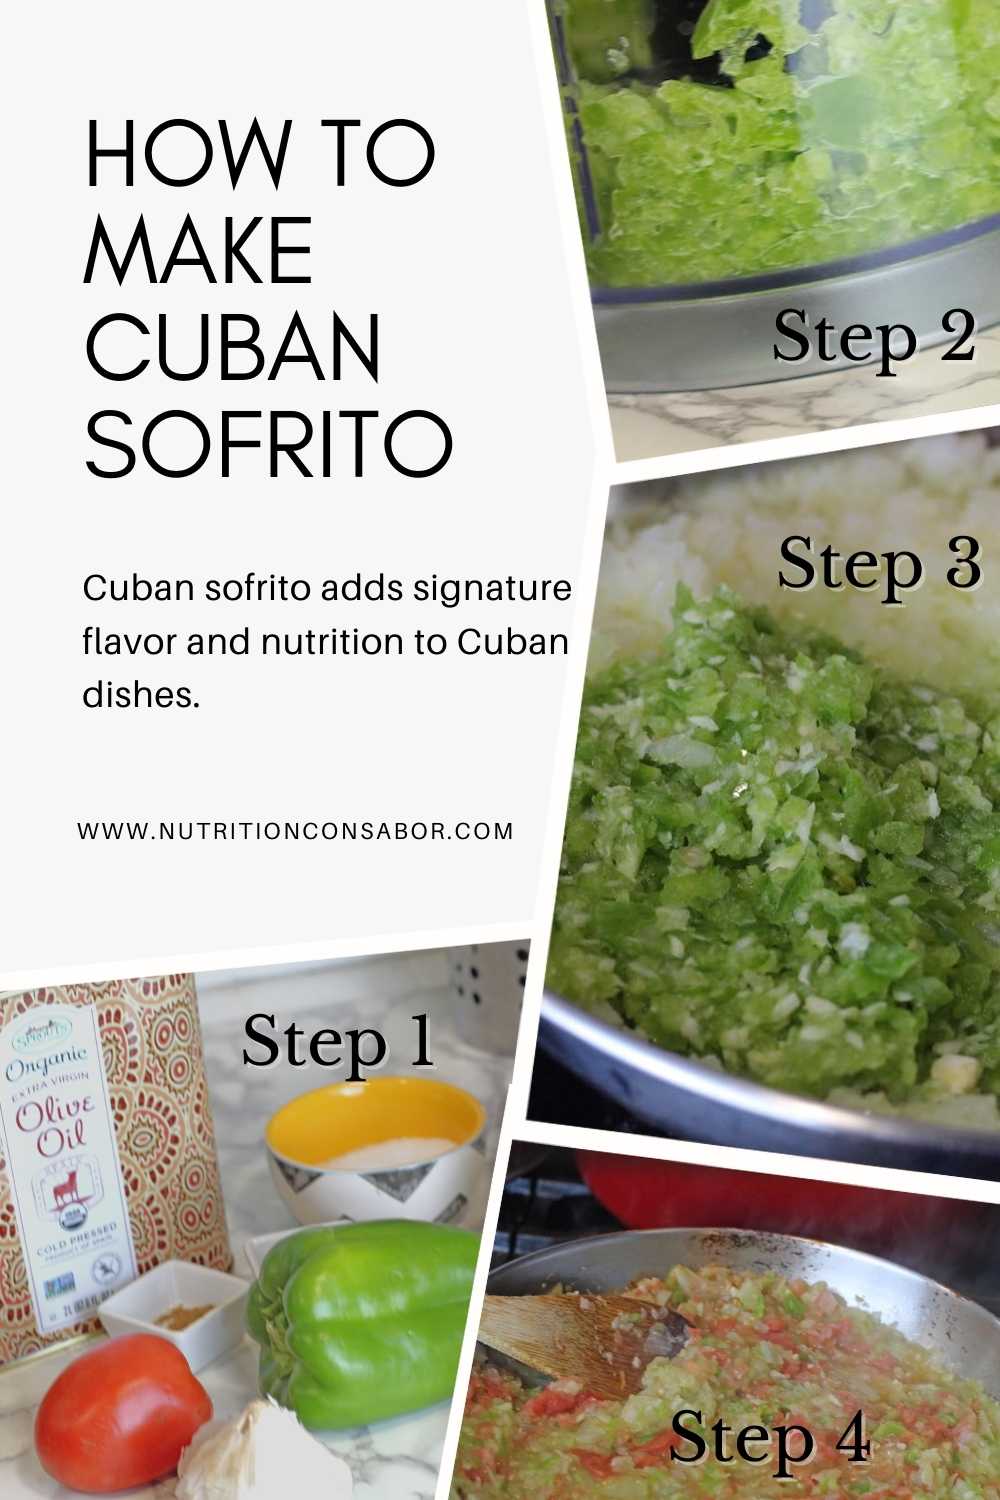 how to make cuban sofrito in 4 steps